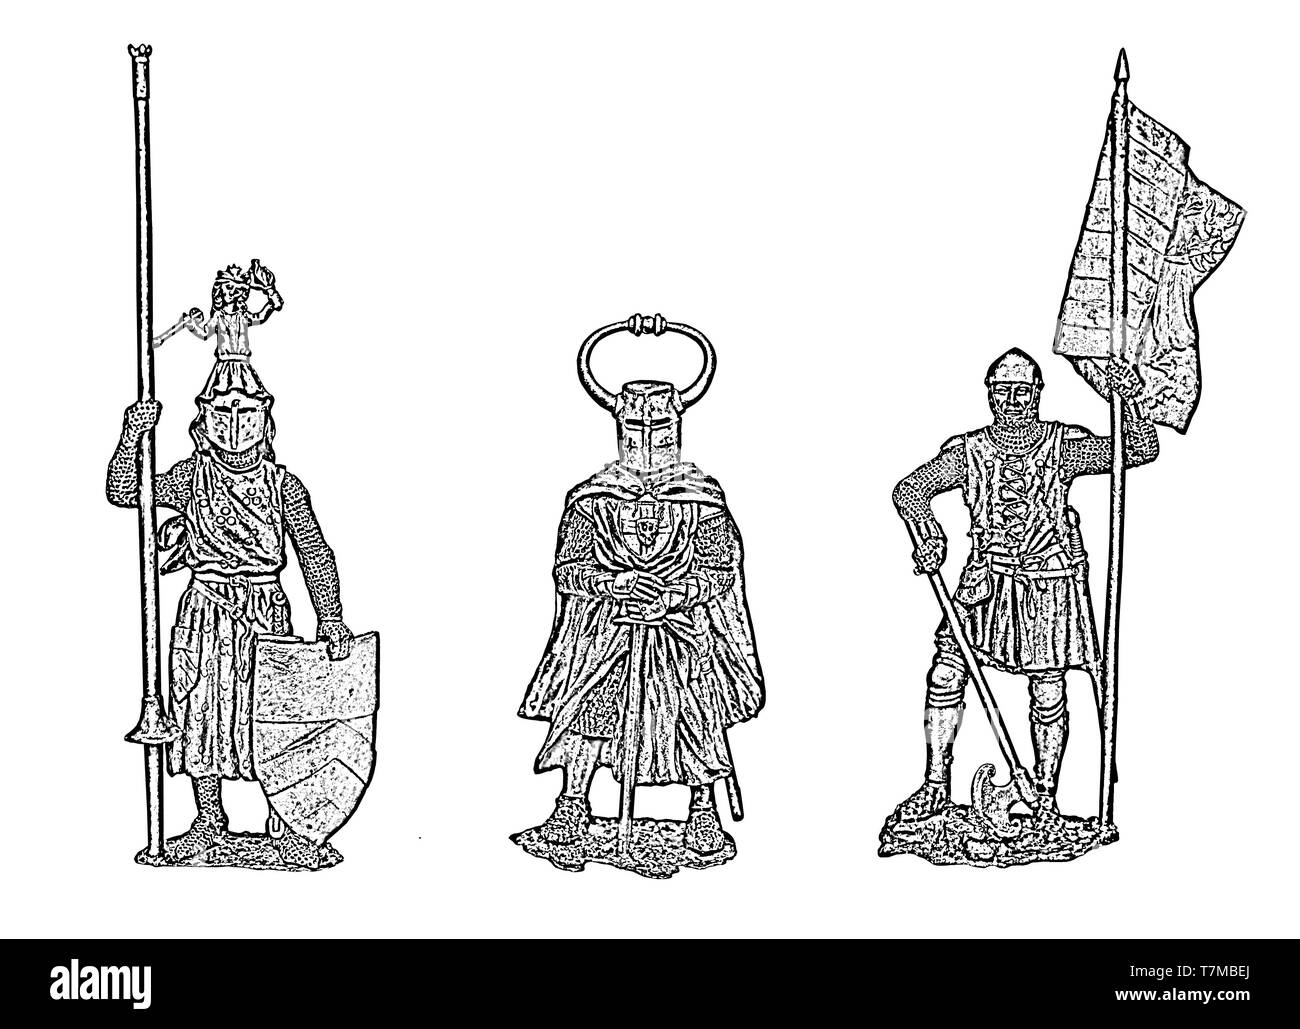 Medieval knights illustration. Set of 3 knights. Knight with banner. Stock Photo